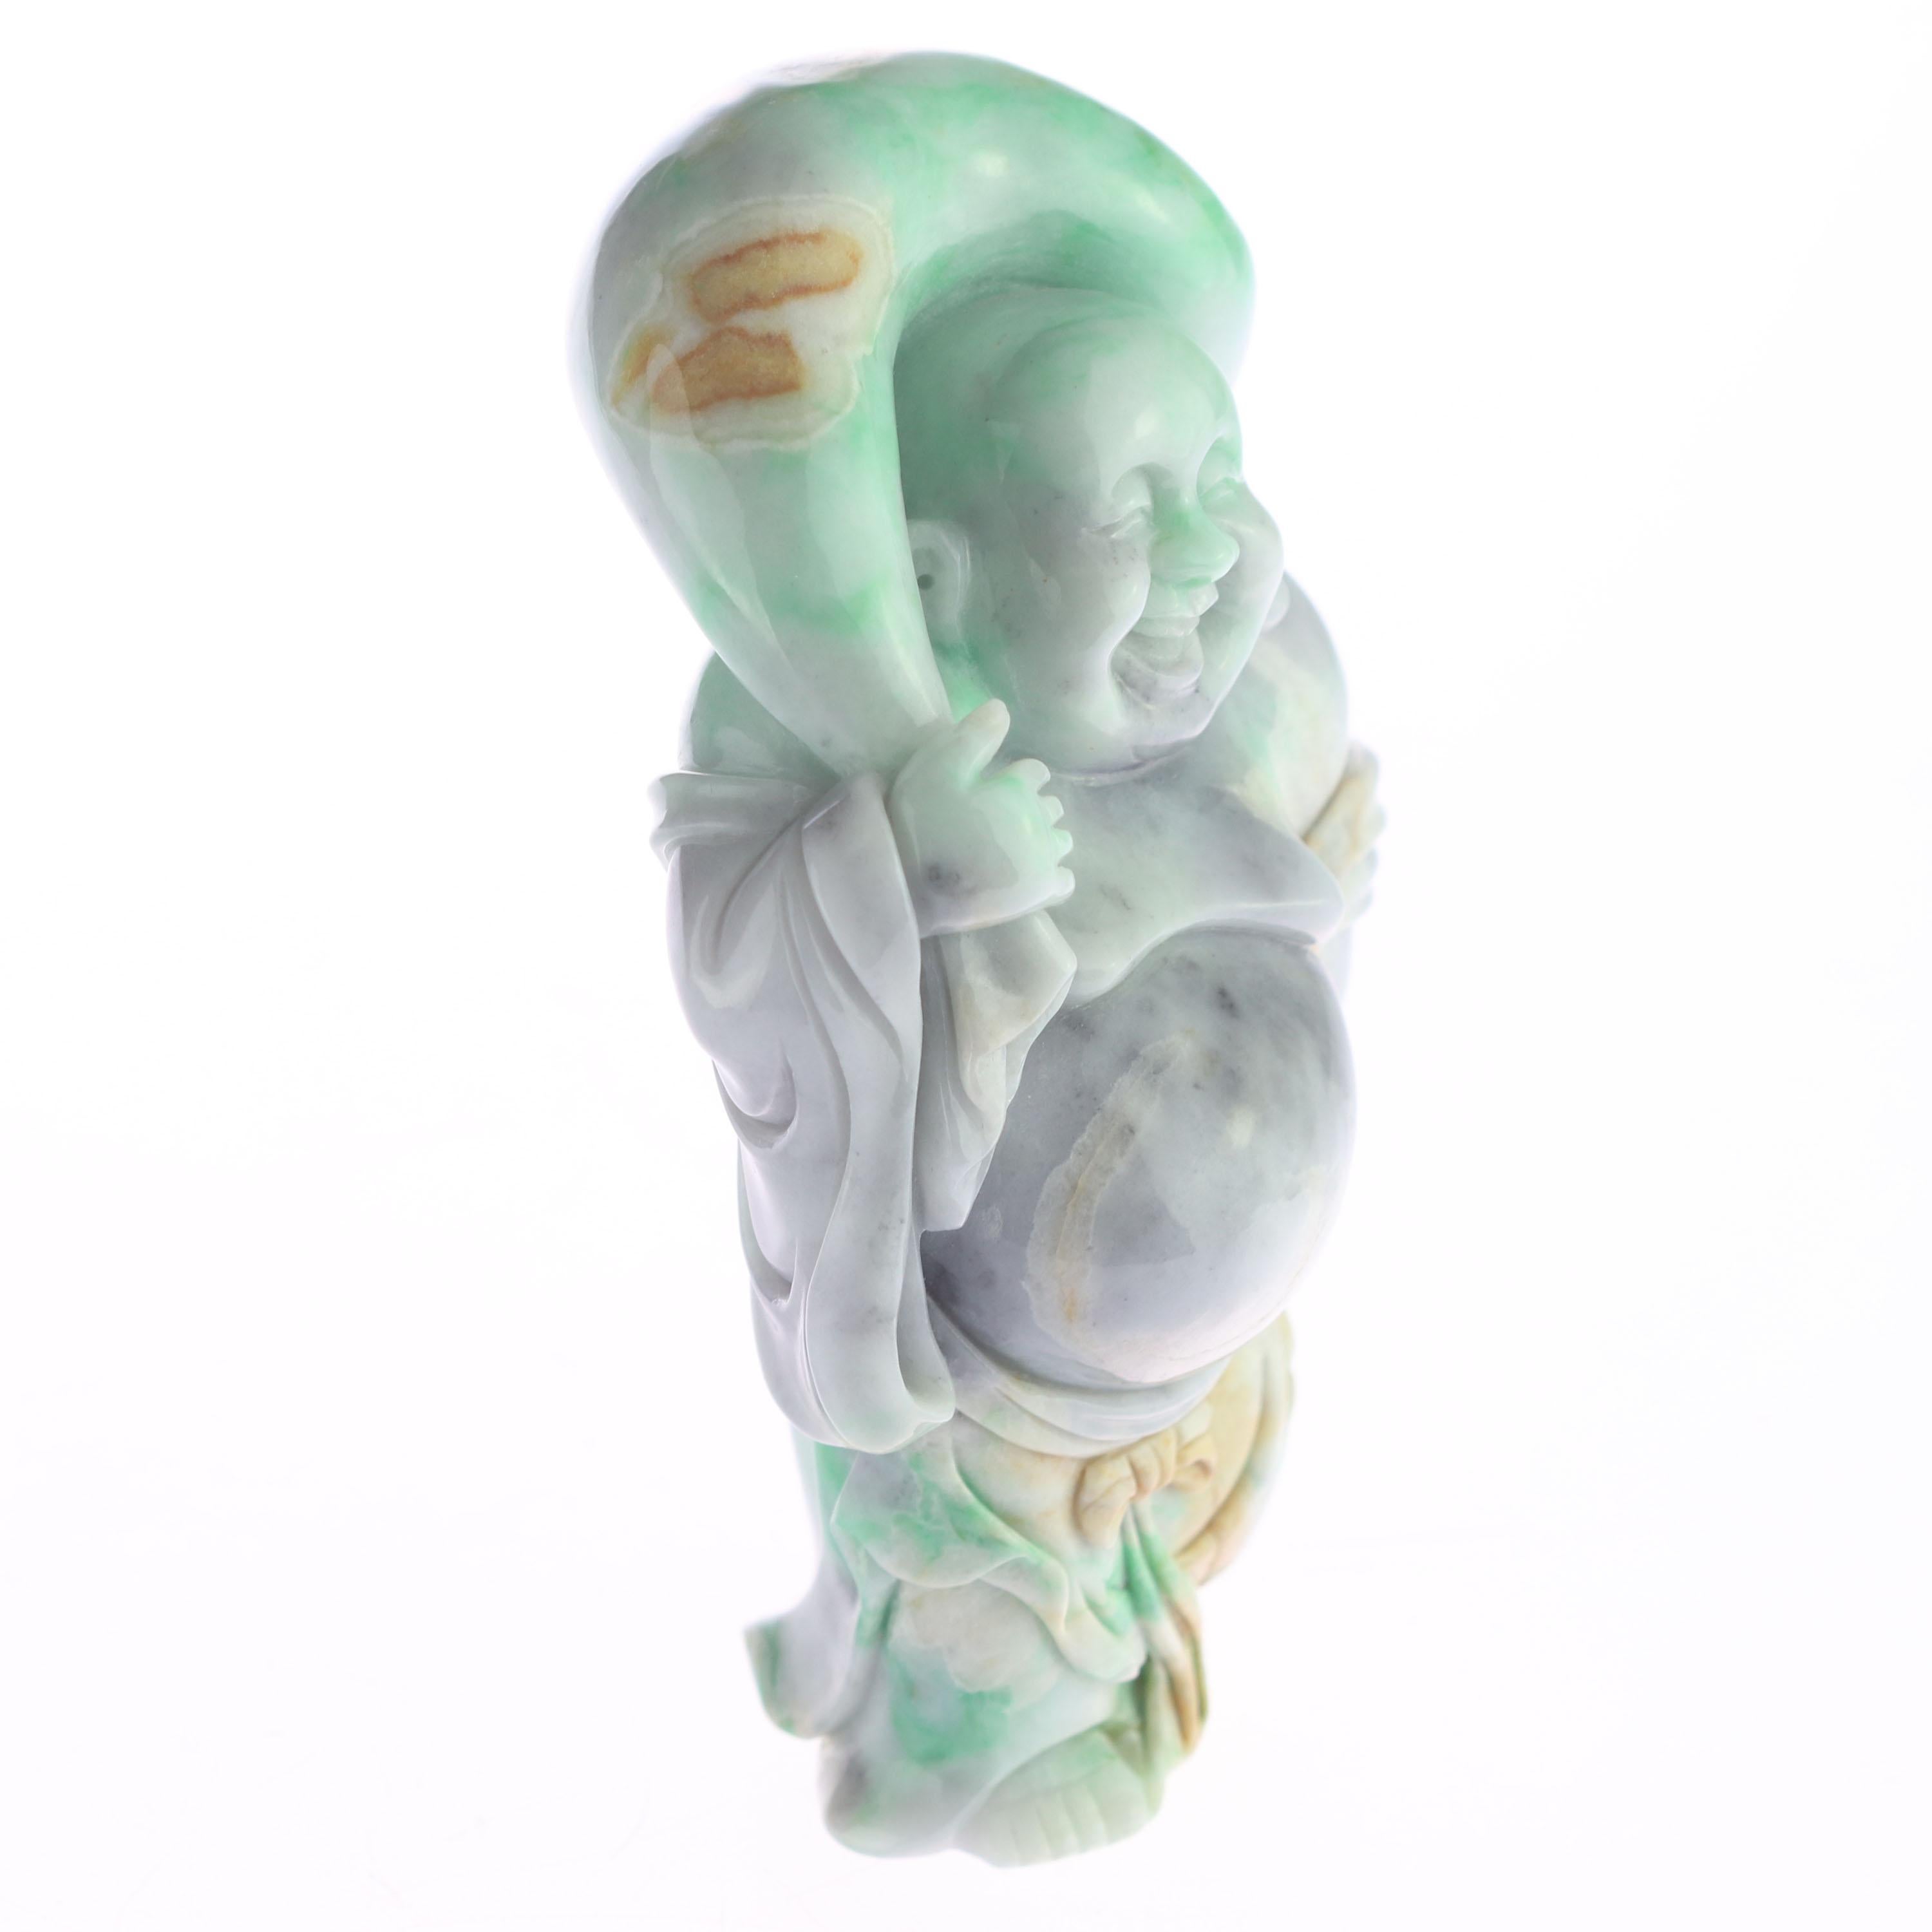 An antique and exceptional work of art dating back to the beginning of the 20th century. A unique masterpiece, a legacy of the Chinese craft of natural hade. Natural Type A Jadeite stunning Buddha statue. A passionate piece of traditional Buddhist